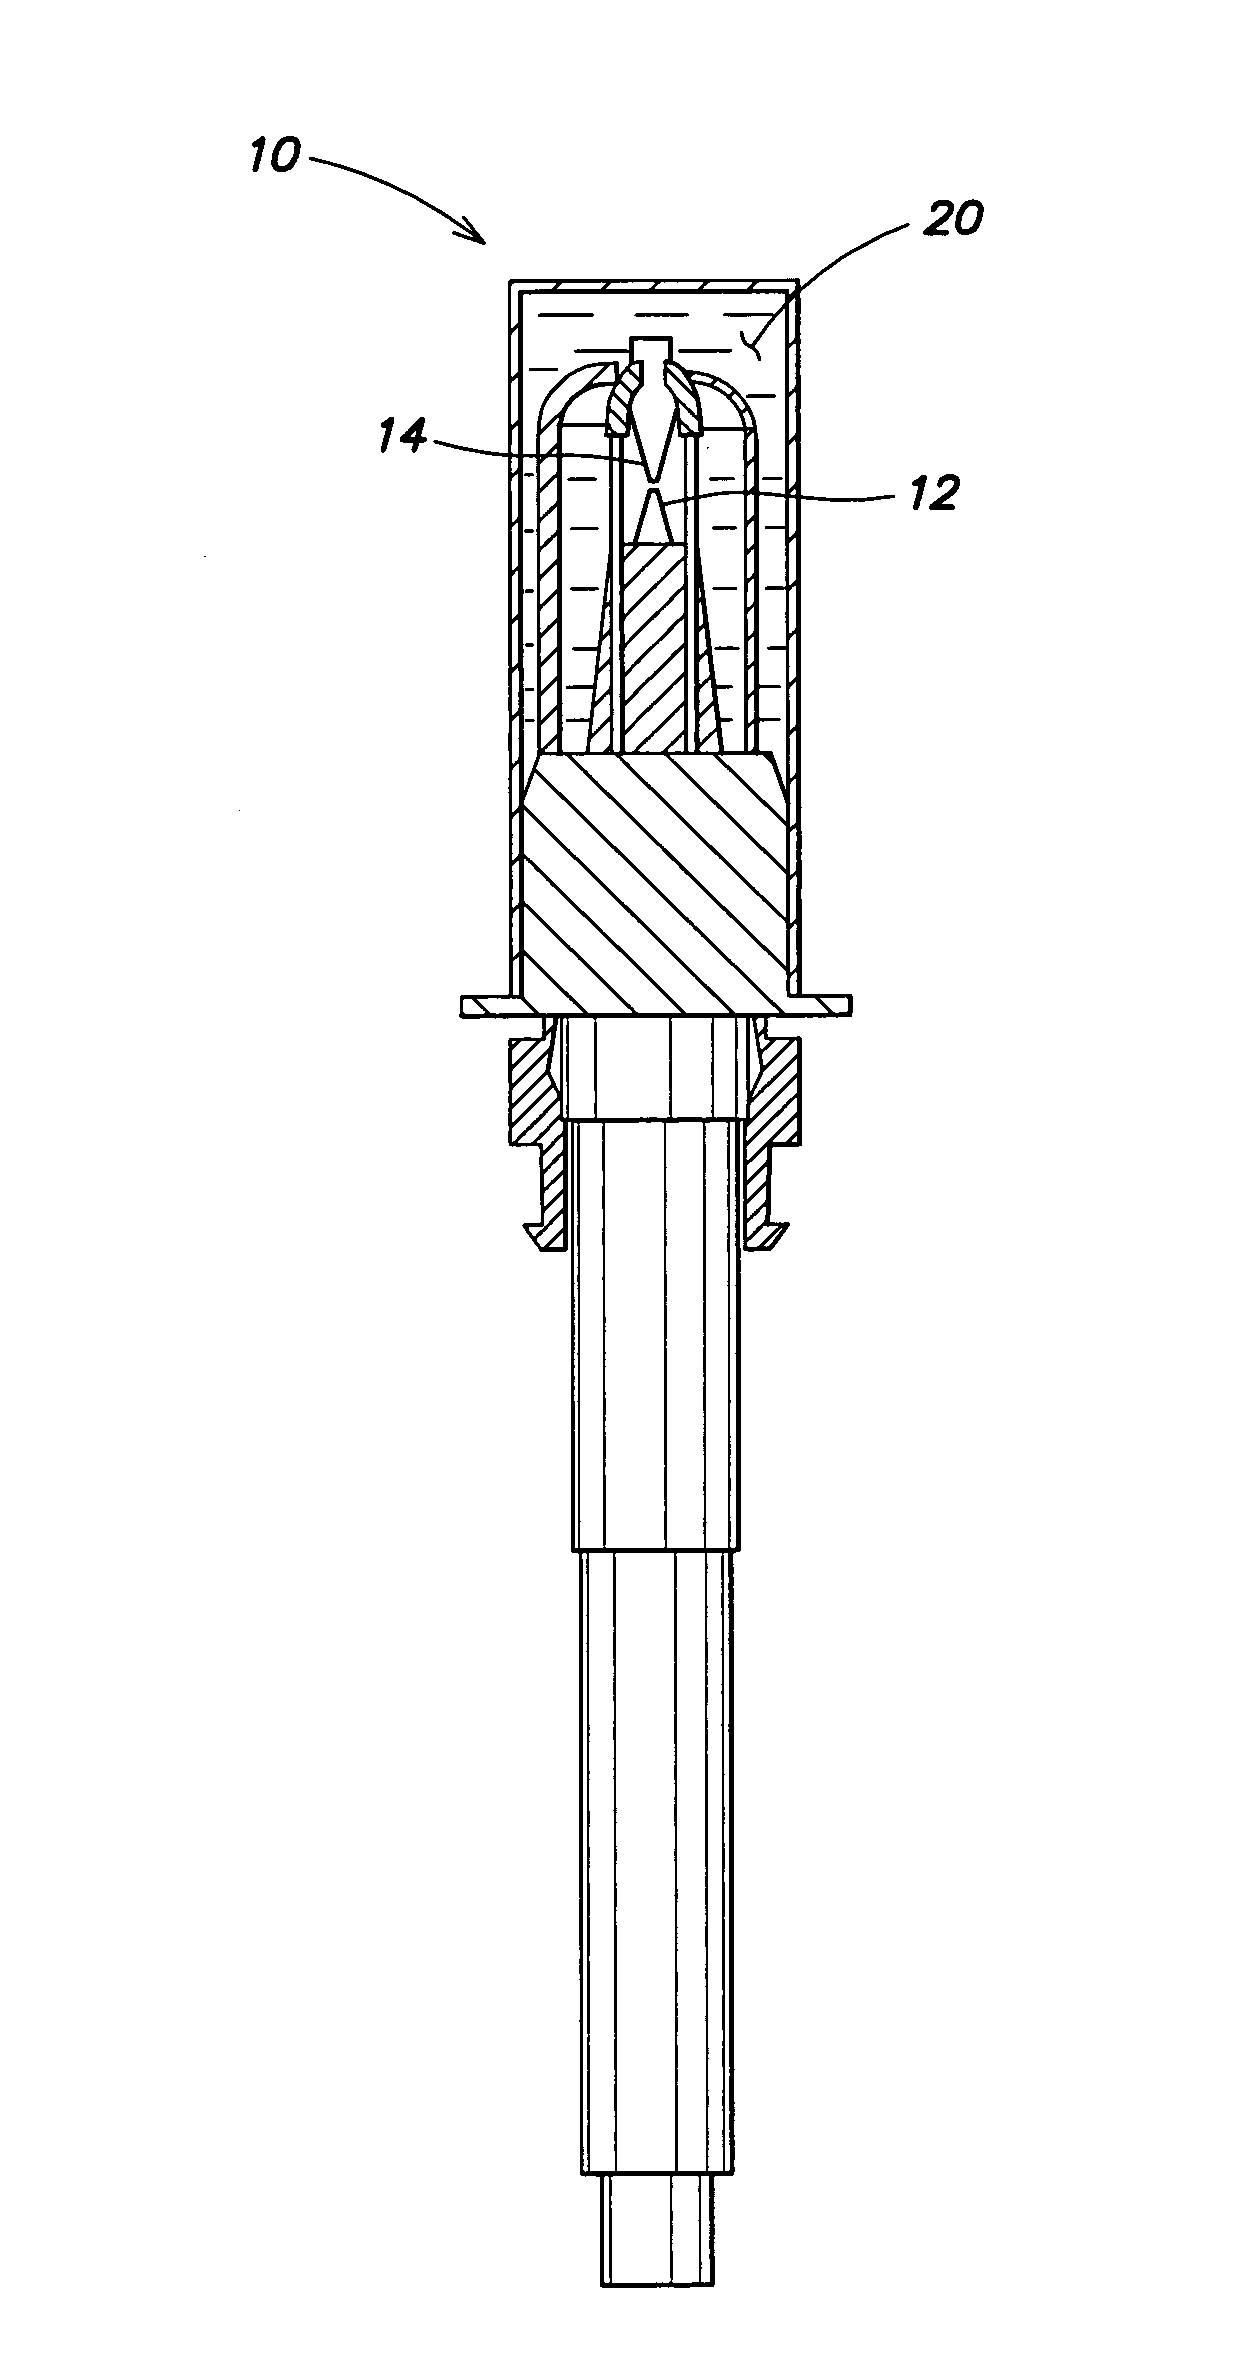 Device for producing electrical discharges in an aqueous medium